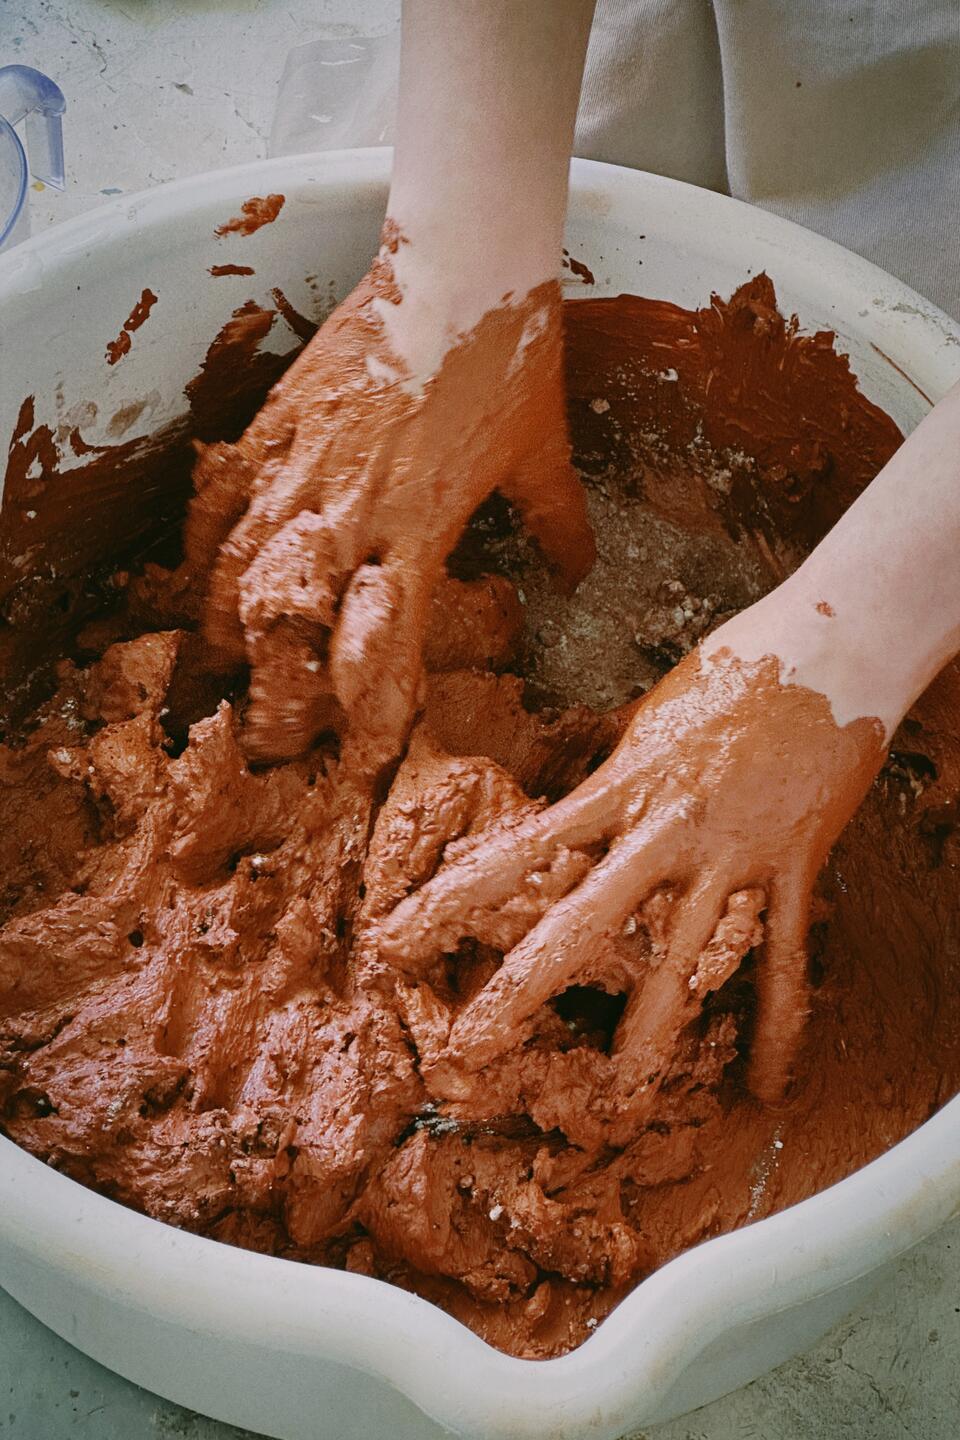 Hands mixing reddish Egyptian Paste in a white bowl, creating a textured, earthy mixture. The scene captures the tactile and immersive process of preparing ceramic material.